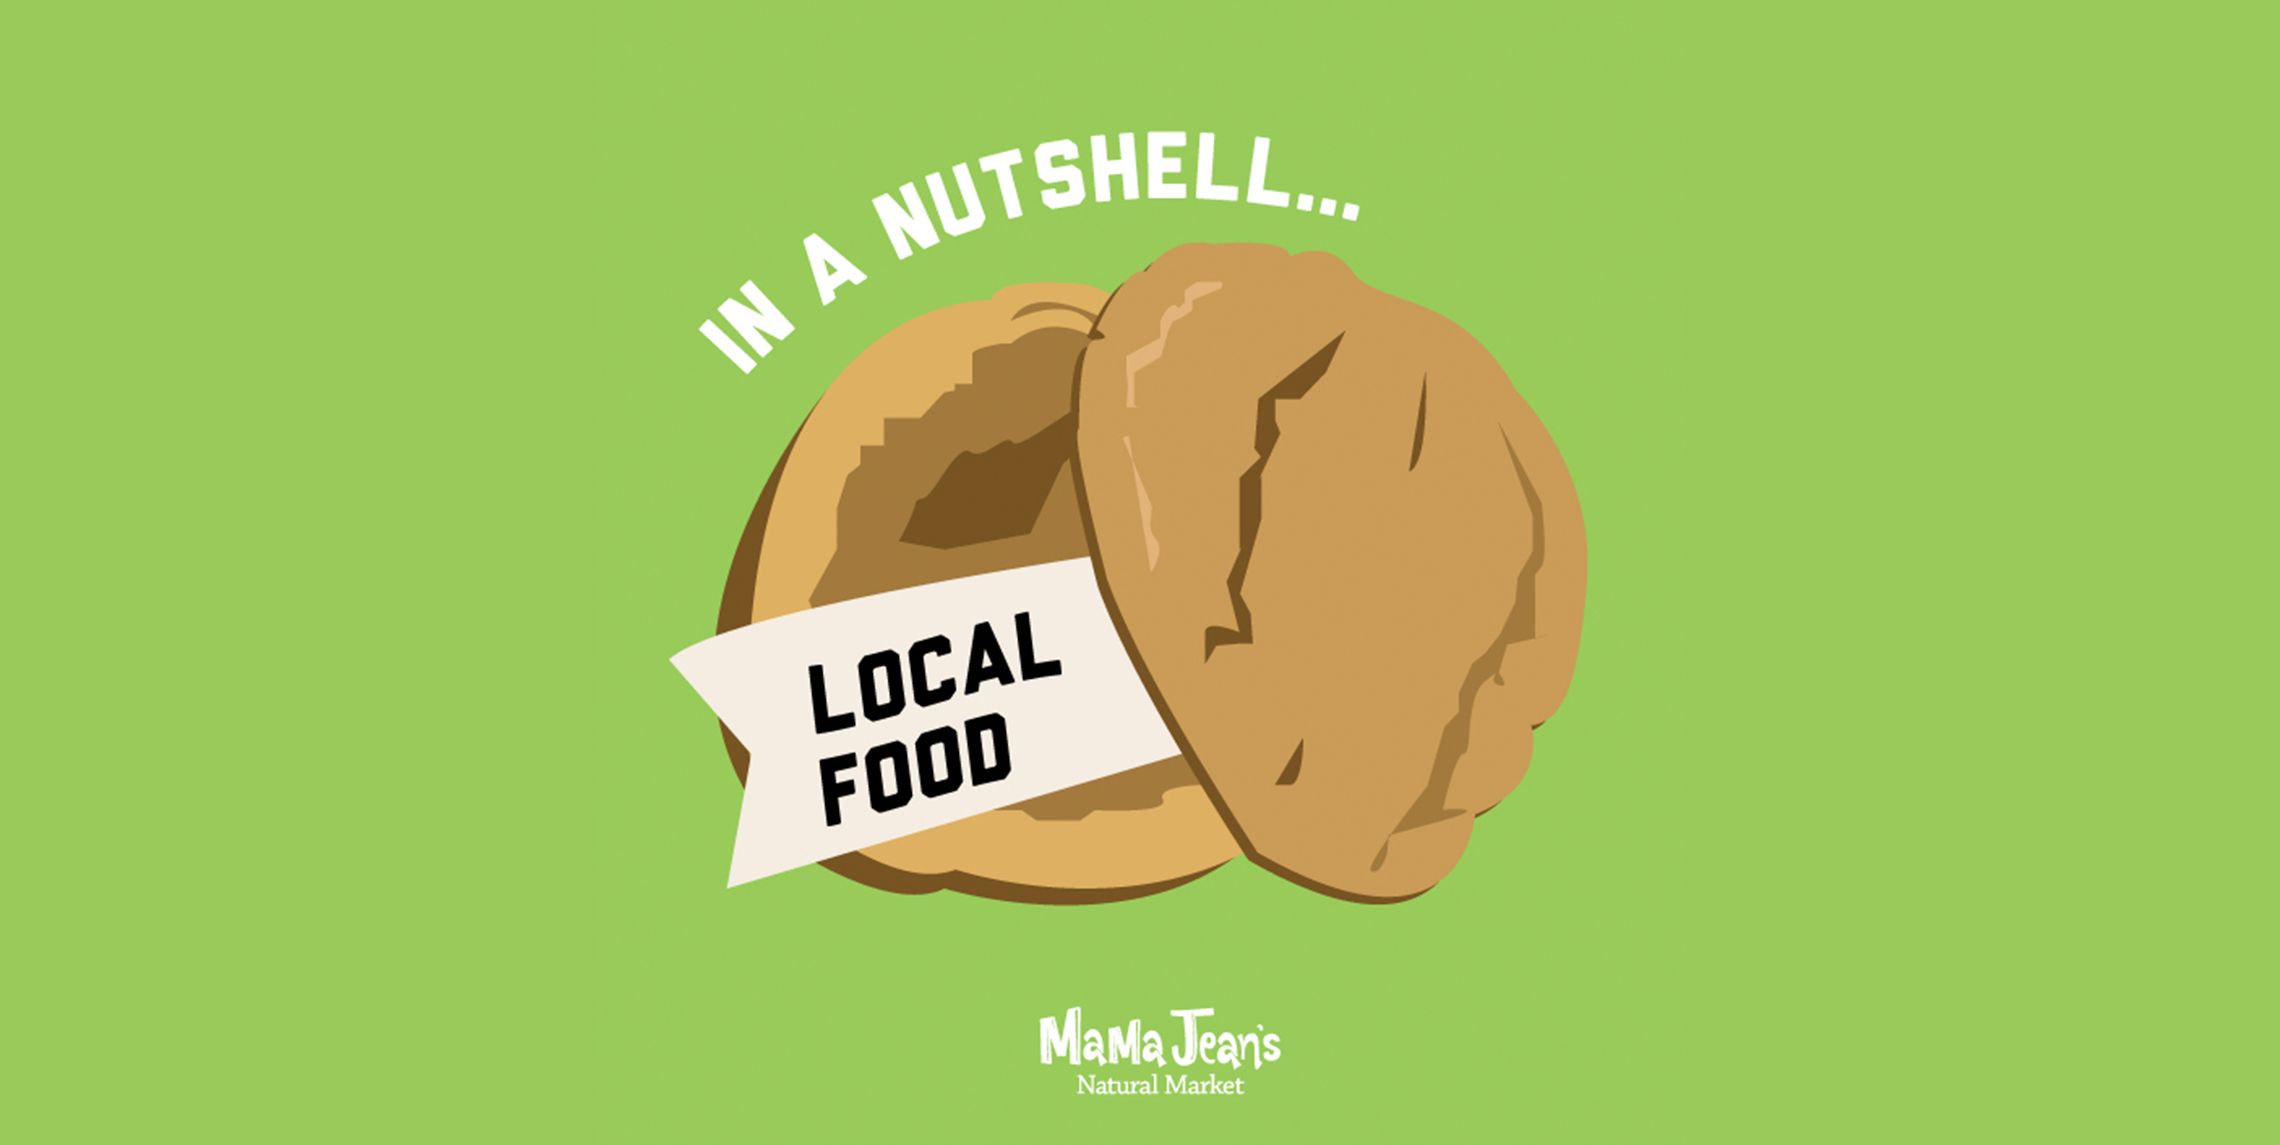 Local Food... In a Nutshell